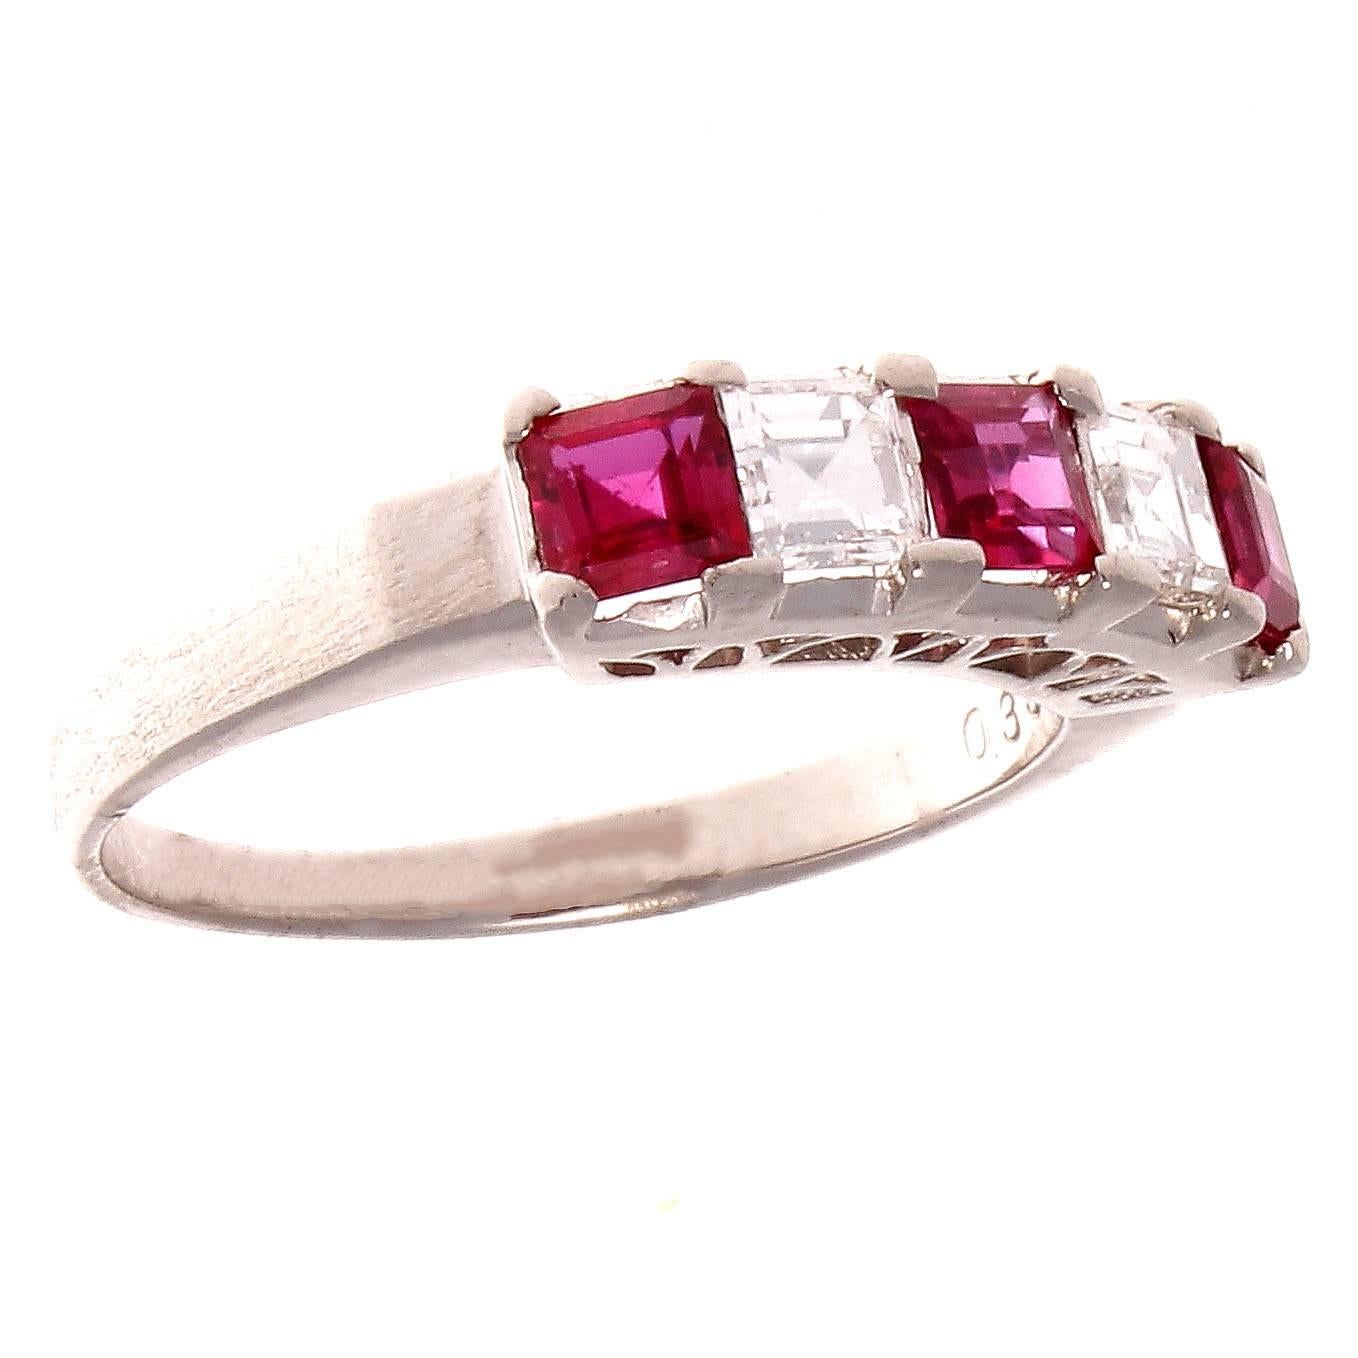 A modern creation of a classic beauty. A colorful mixture of vibrant red synthetic rubies that alternates with colorless white diamonds. Crafted in platinum.

Ring size 7 and may easily be resized to fit.